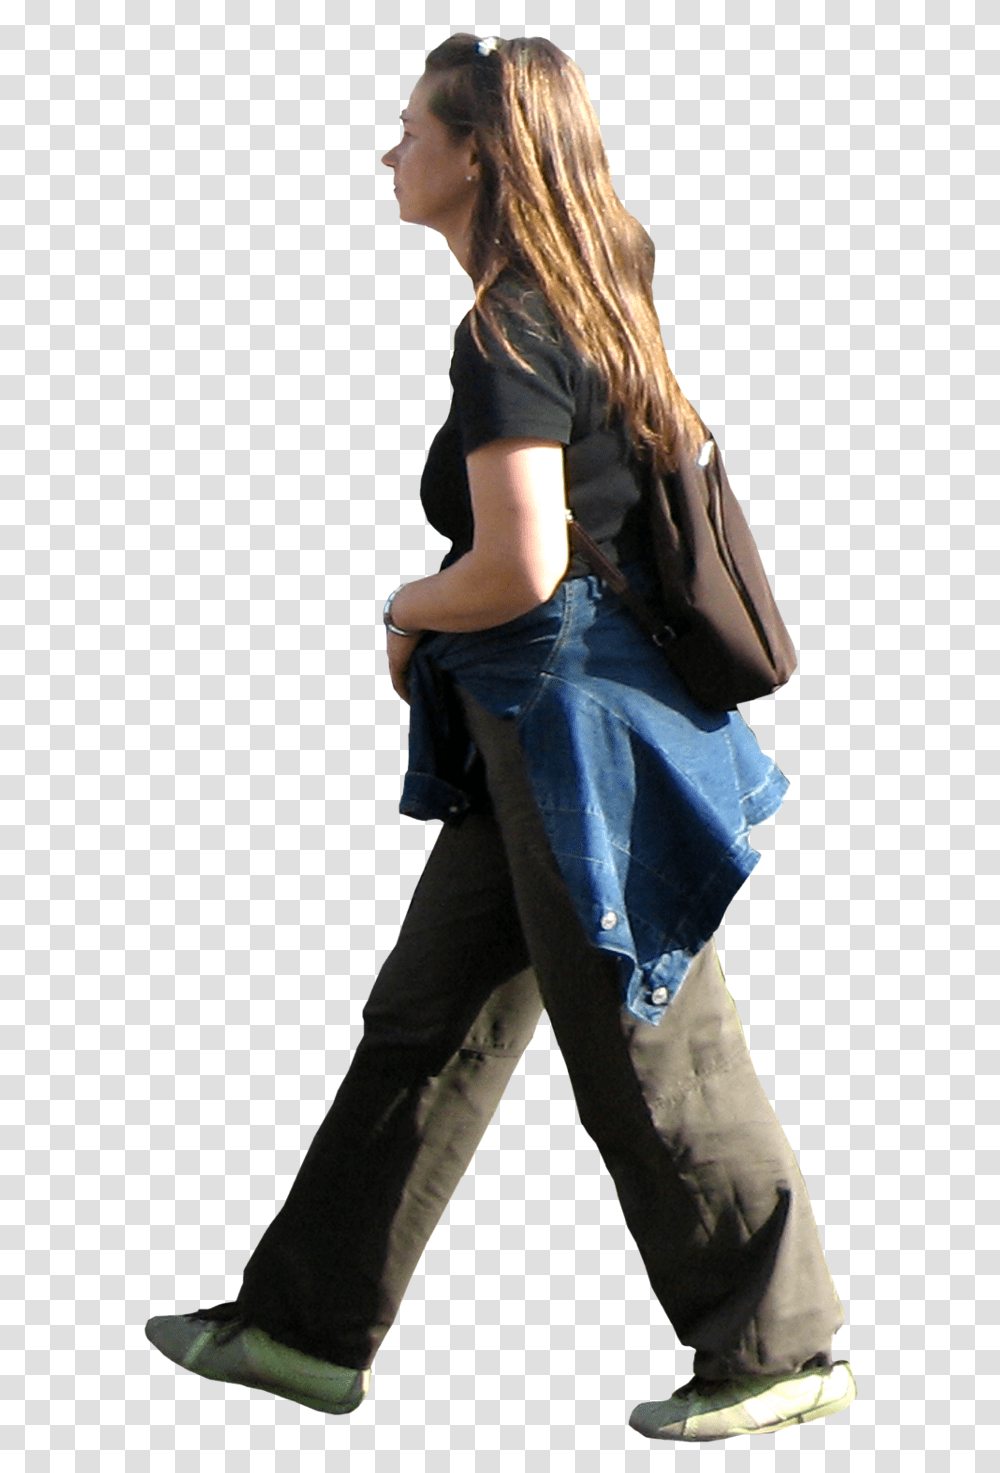 People Entourage Picture Side View People Walking, Clothing, Person, Dance Pose, Leisure Activities Transparent Png